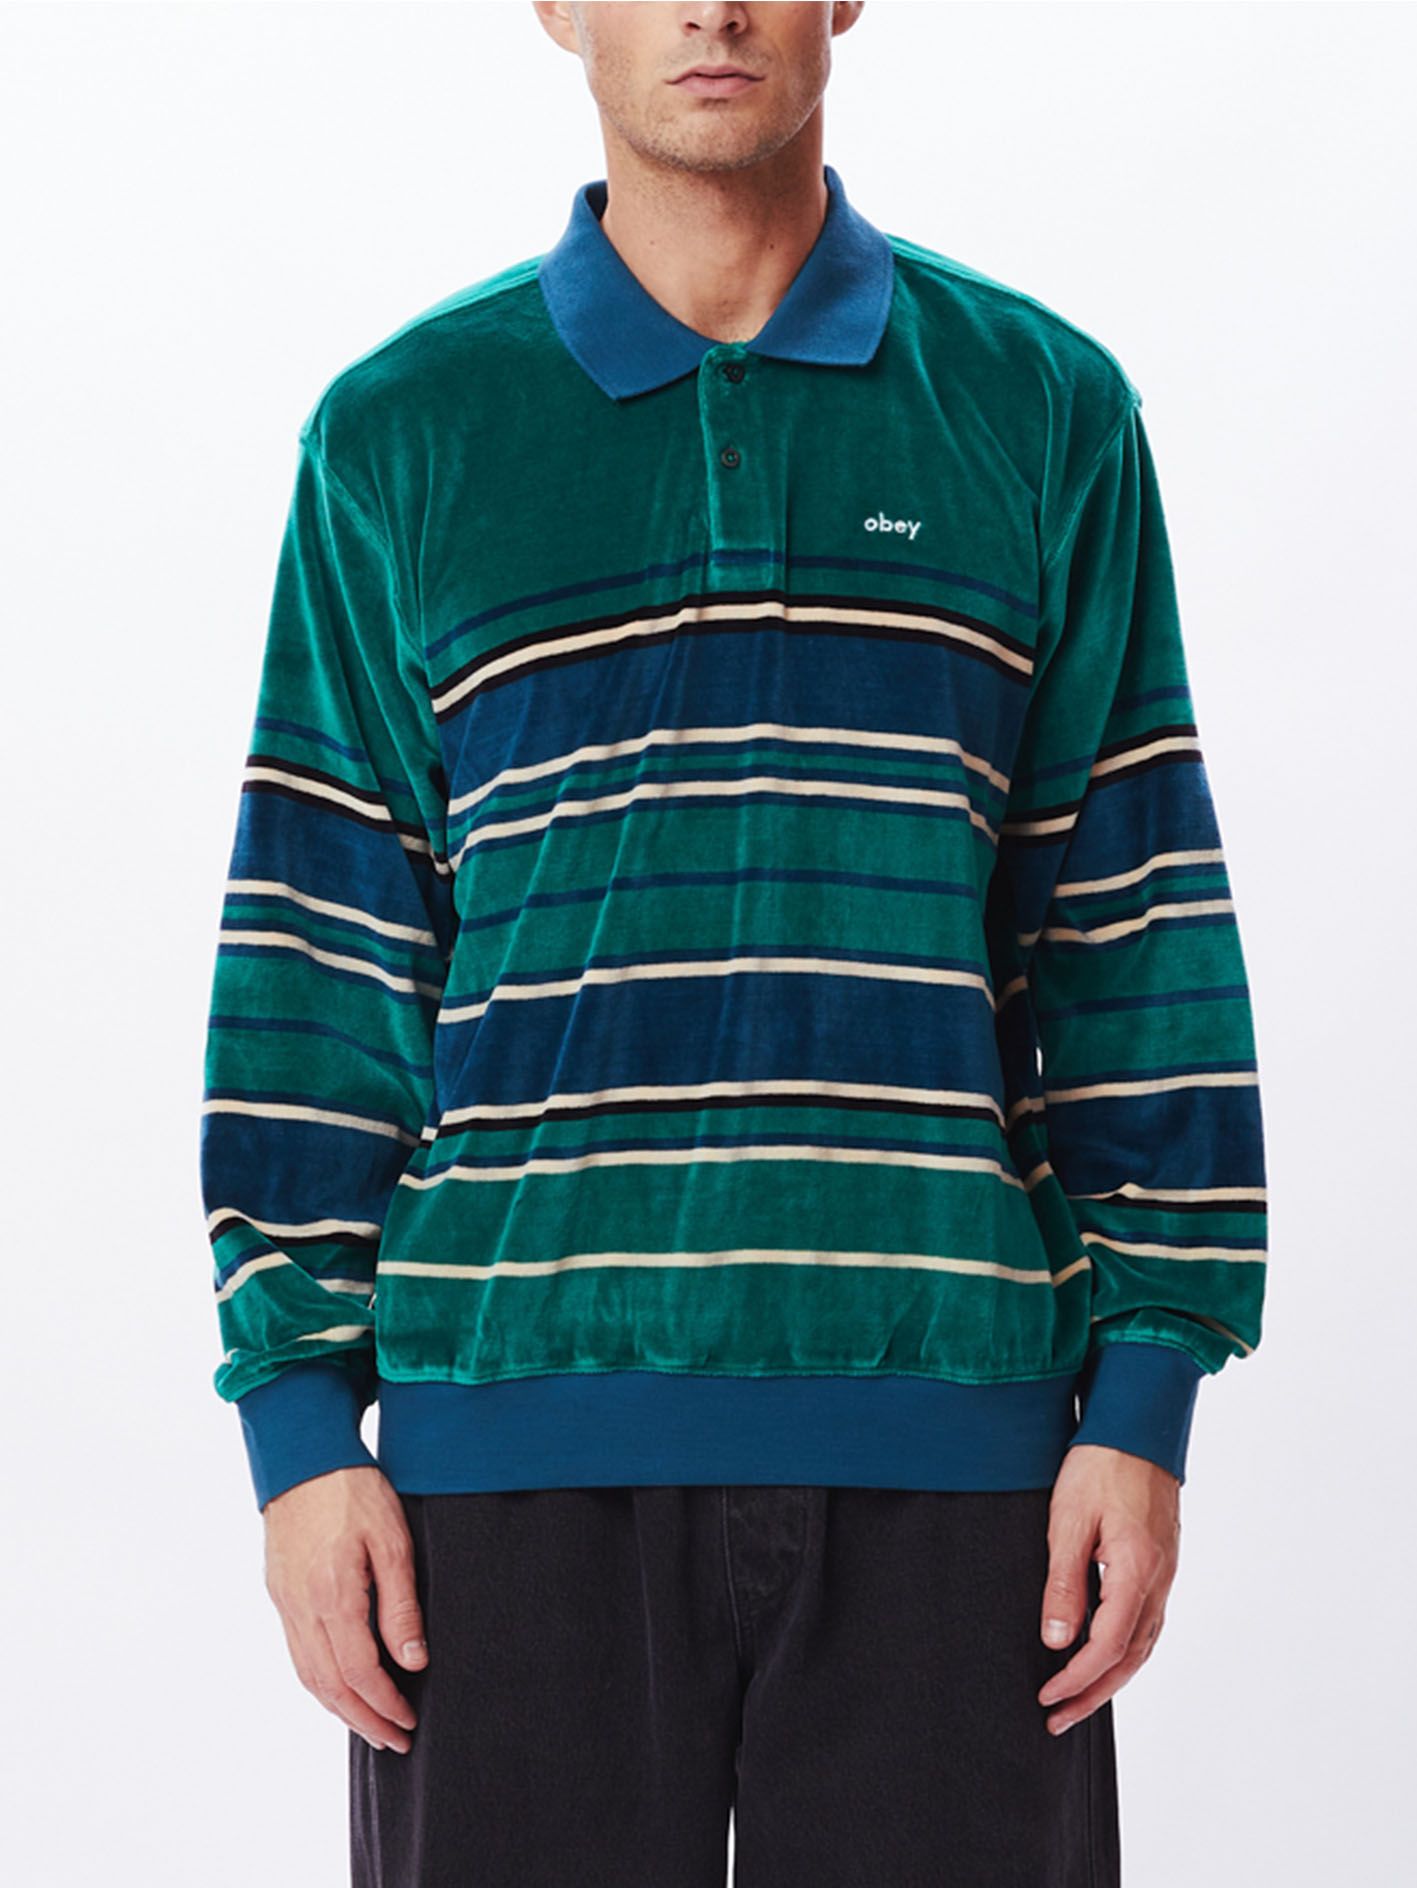 OBEY - ベロアポロ - CLIFTON VELOUR POLO - IVY MULTI